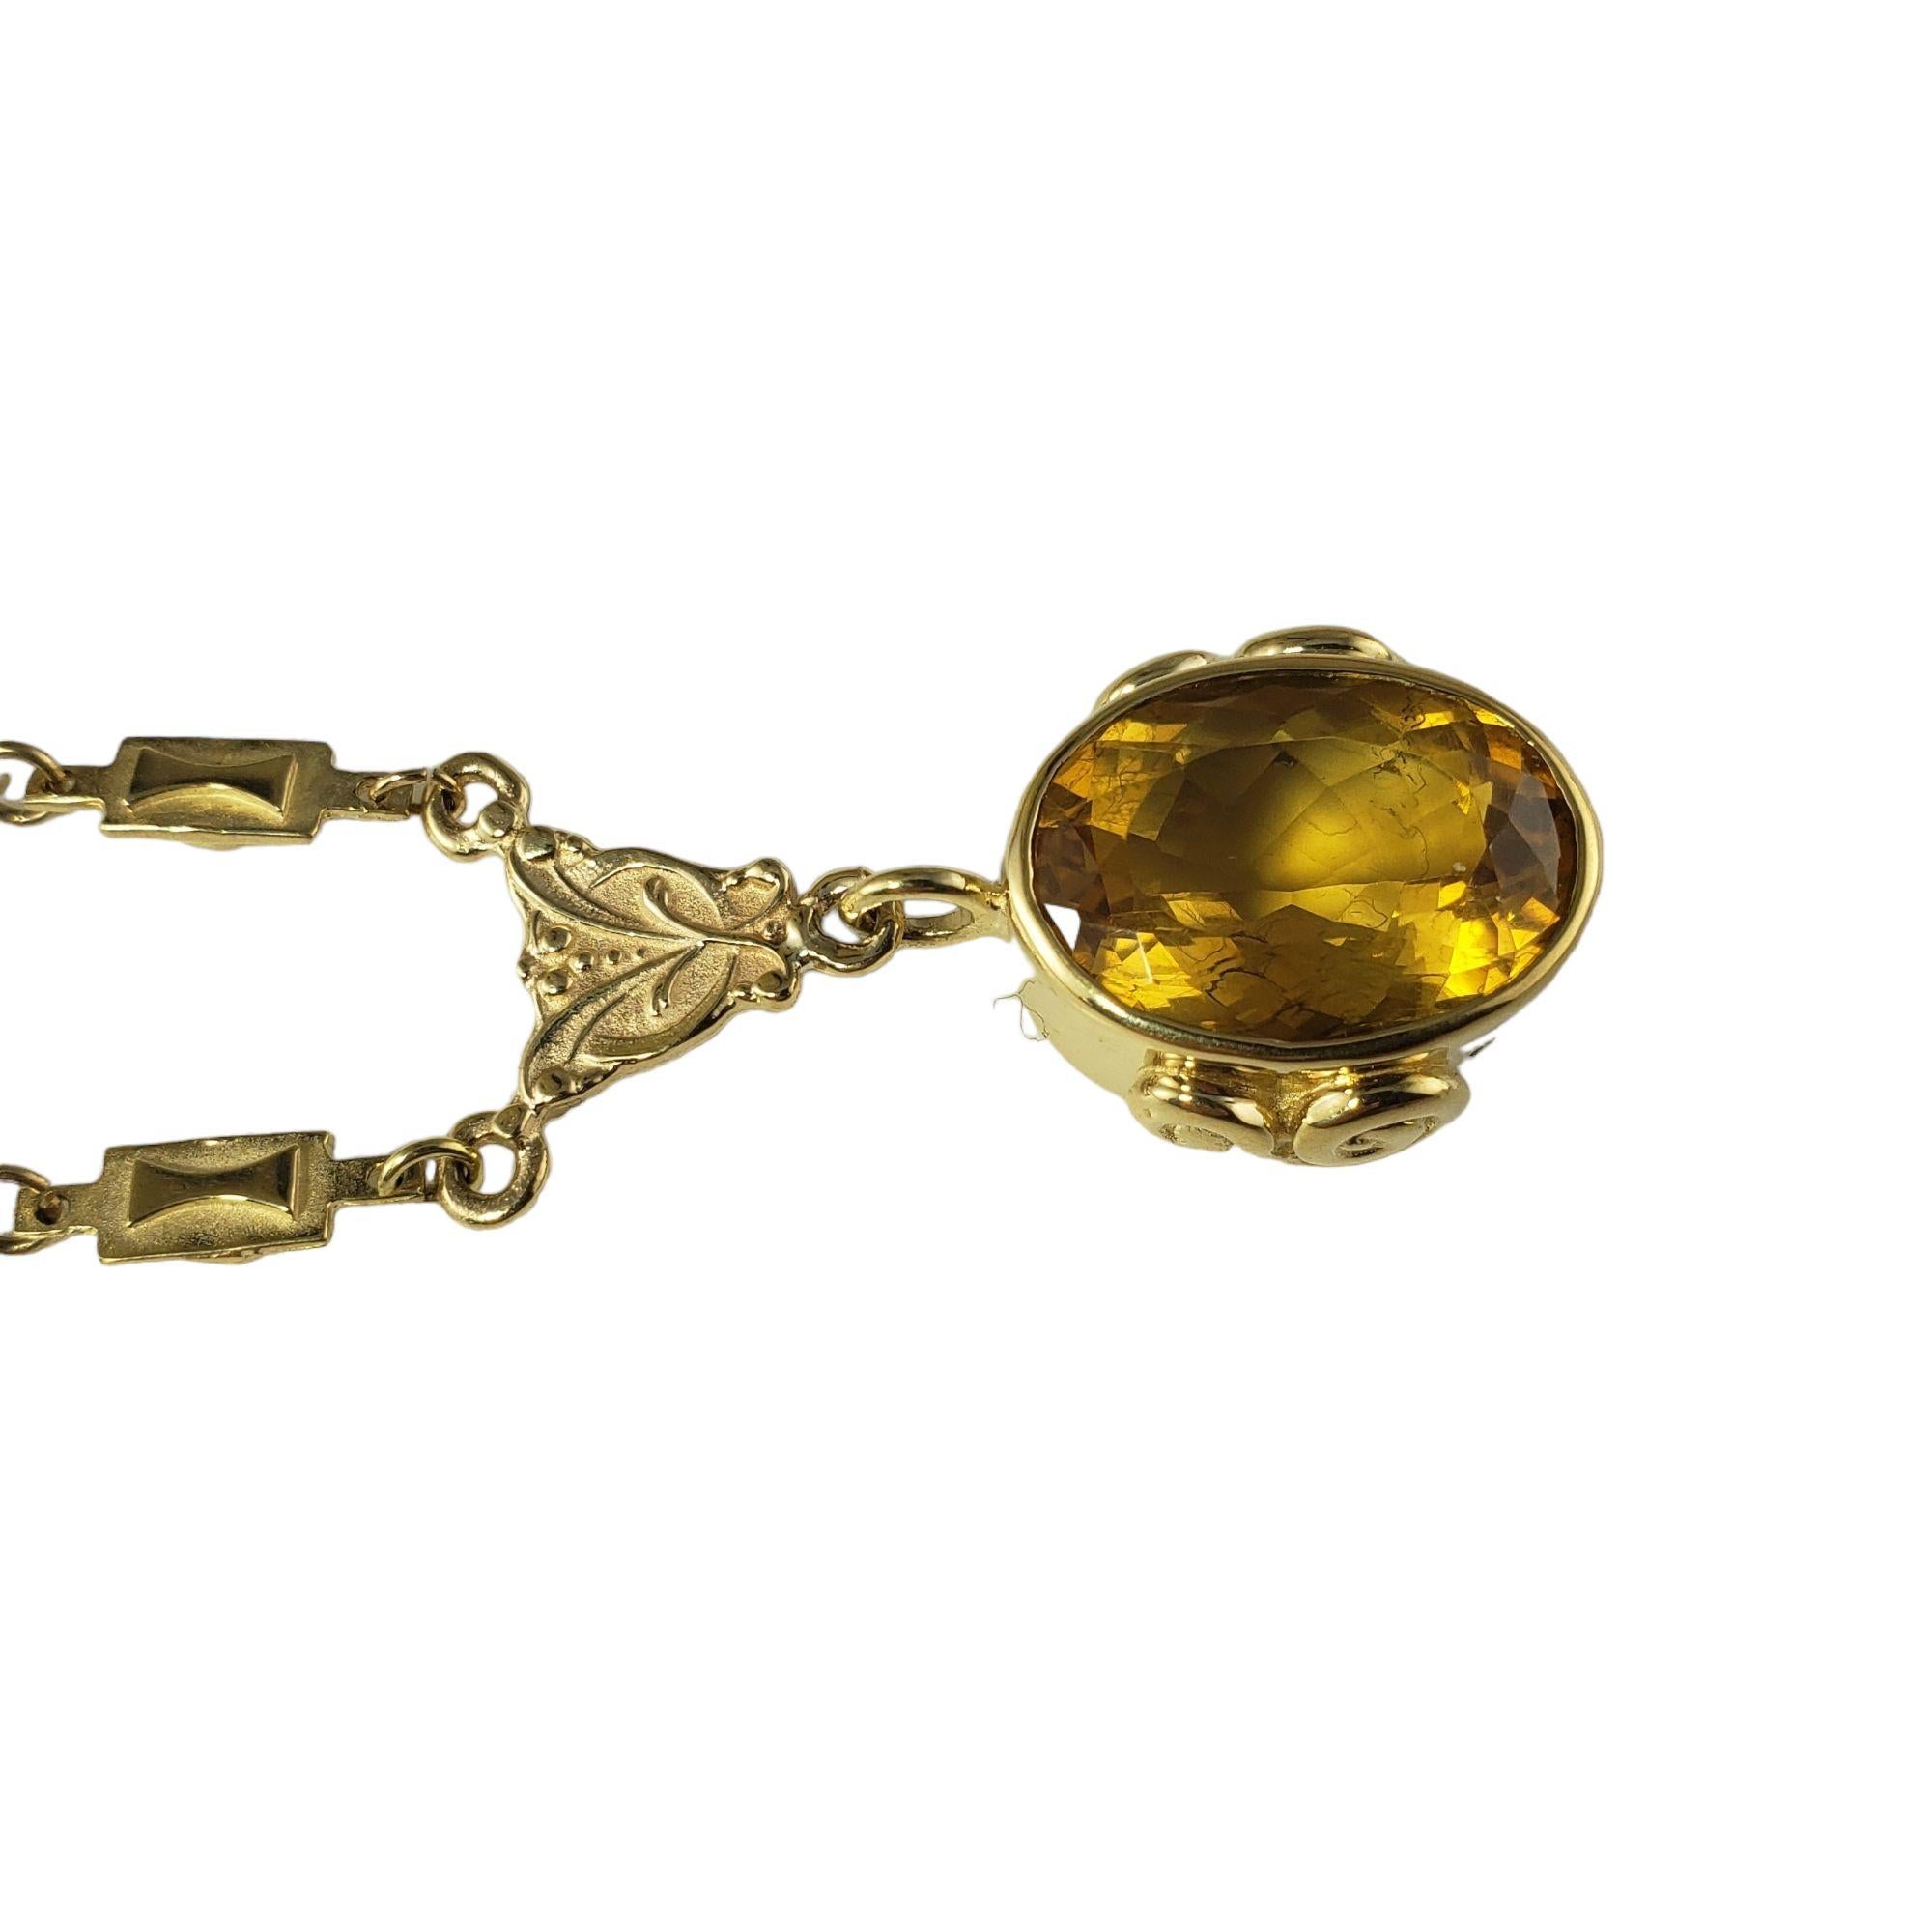 Vintage 14 Karat Yellow Gold and Citrine Pendant Necklace JAGi Certified-

This stunning pendant necklace features one oval citrine (17 mm x 12 mm) suspended from an ornate link necklace.

Citrine weight: 8.71 ct.

Size: 15 inches

Weight: 22 gr./